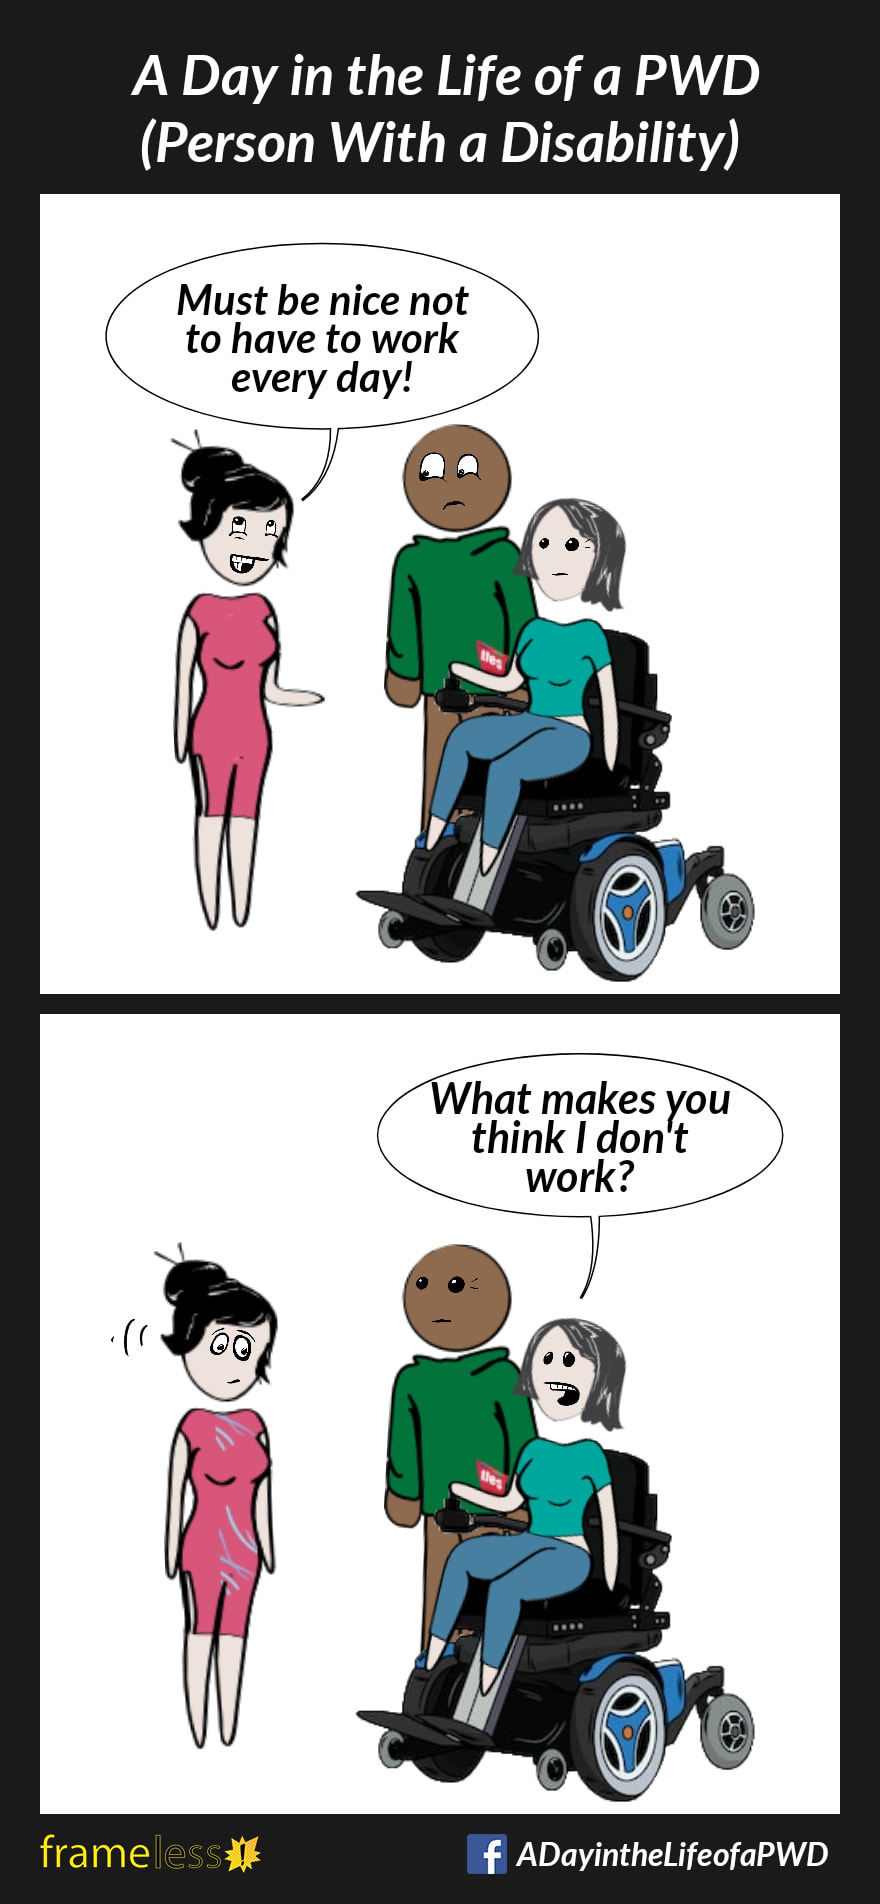 COMIC STRIP 
A Day in the Life of a PWD (Person With a Disability) 

Frame 1:
A woman in a power wheelchair and her friend are chatting with an acquaintance. 
ACQUAINTANCE: Must be nice not to have to work every day!

Frame 2:
WOMAN: What makes you think I don't work?